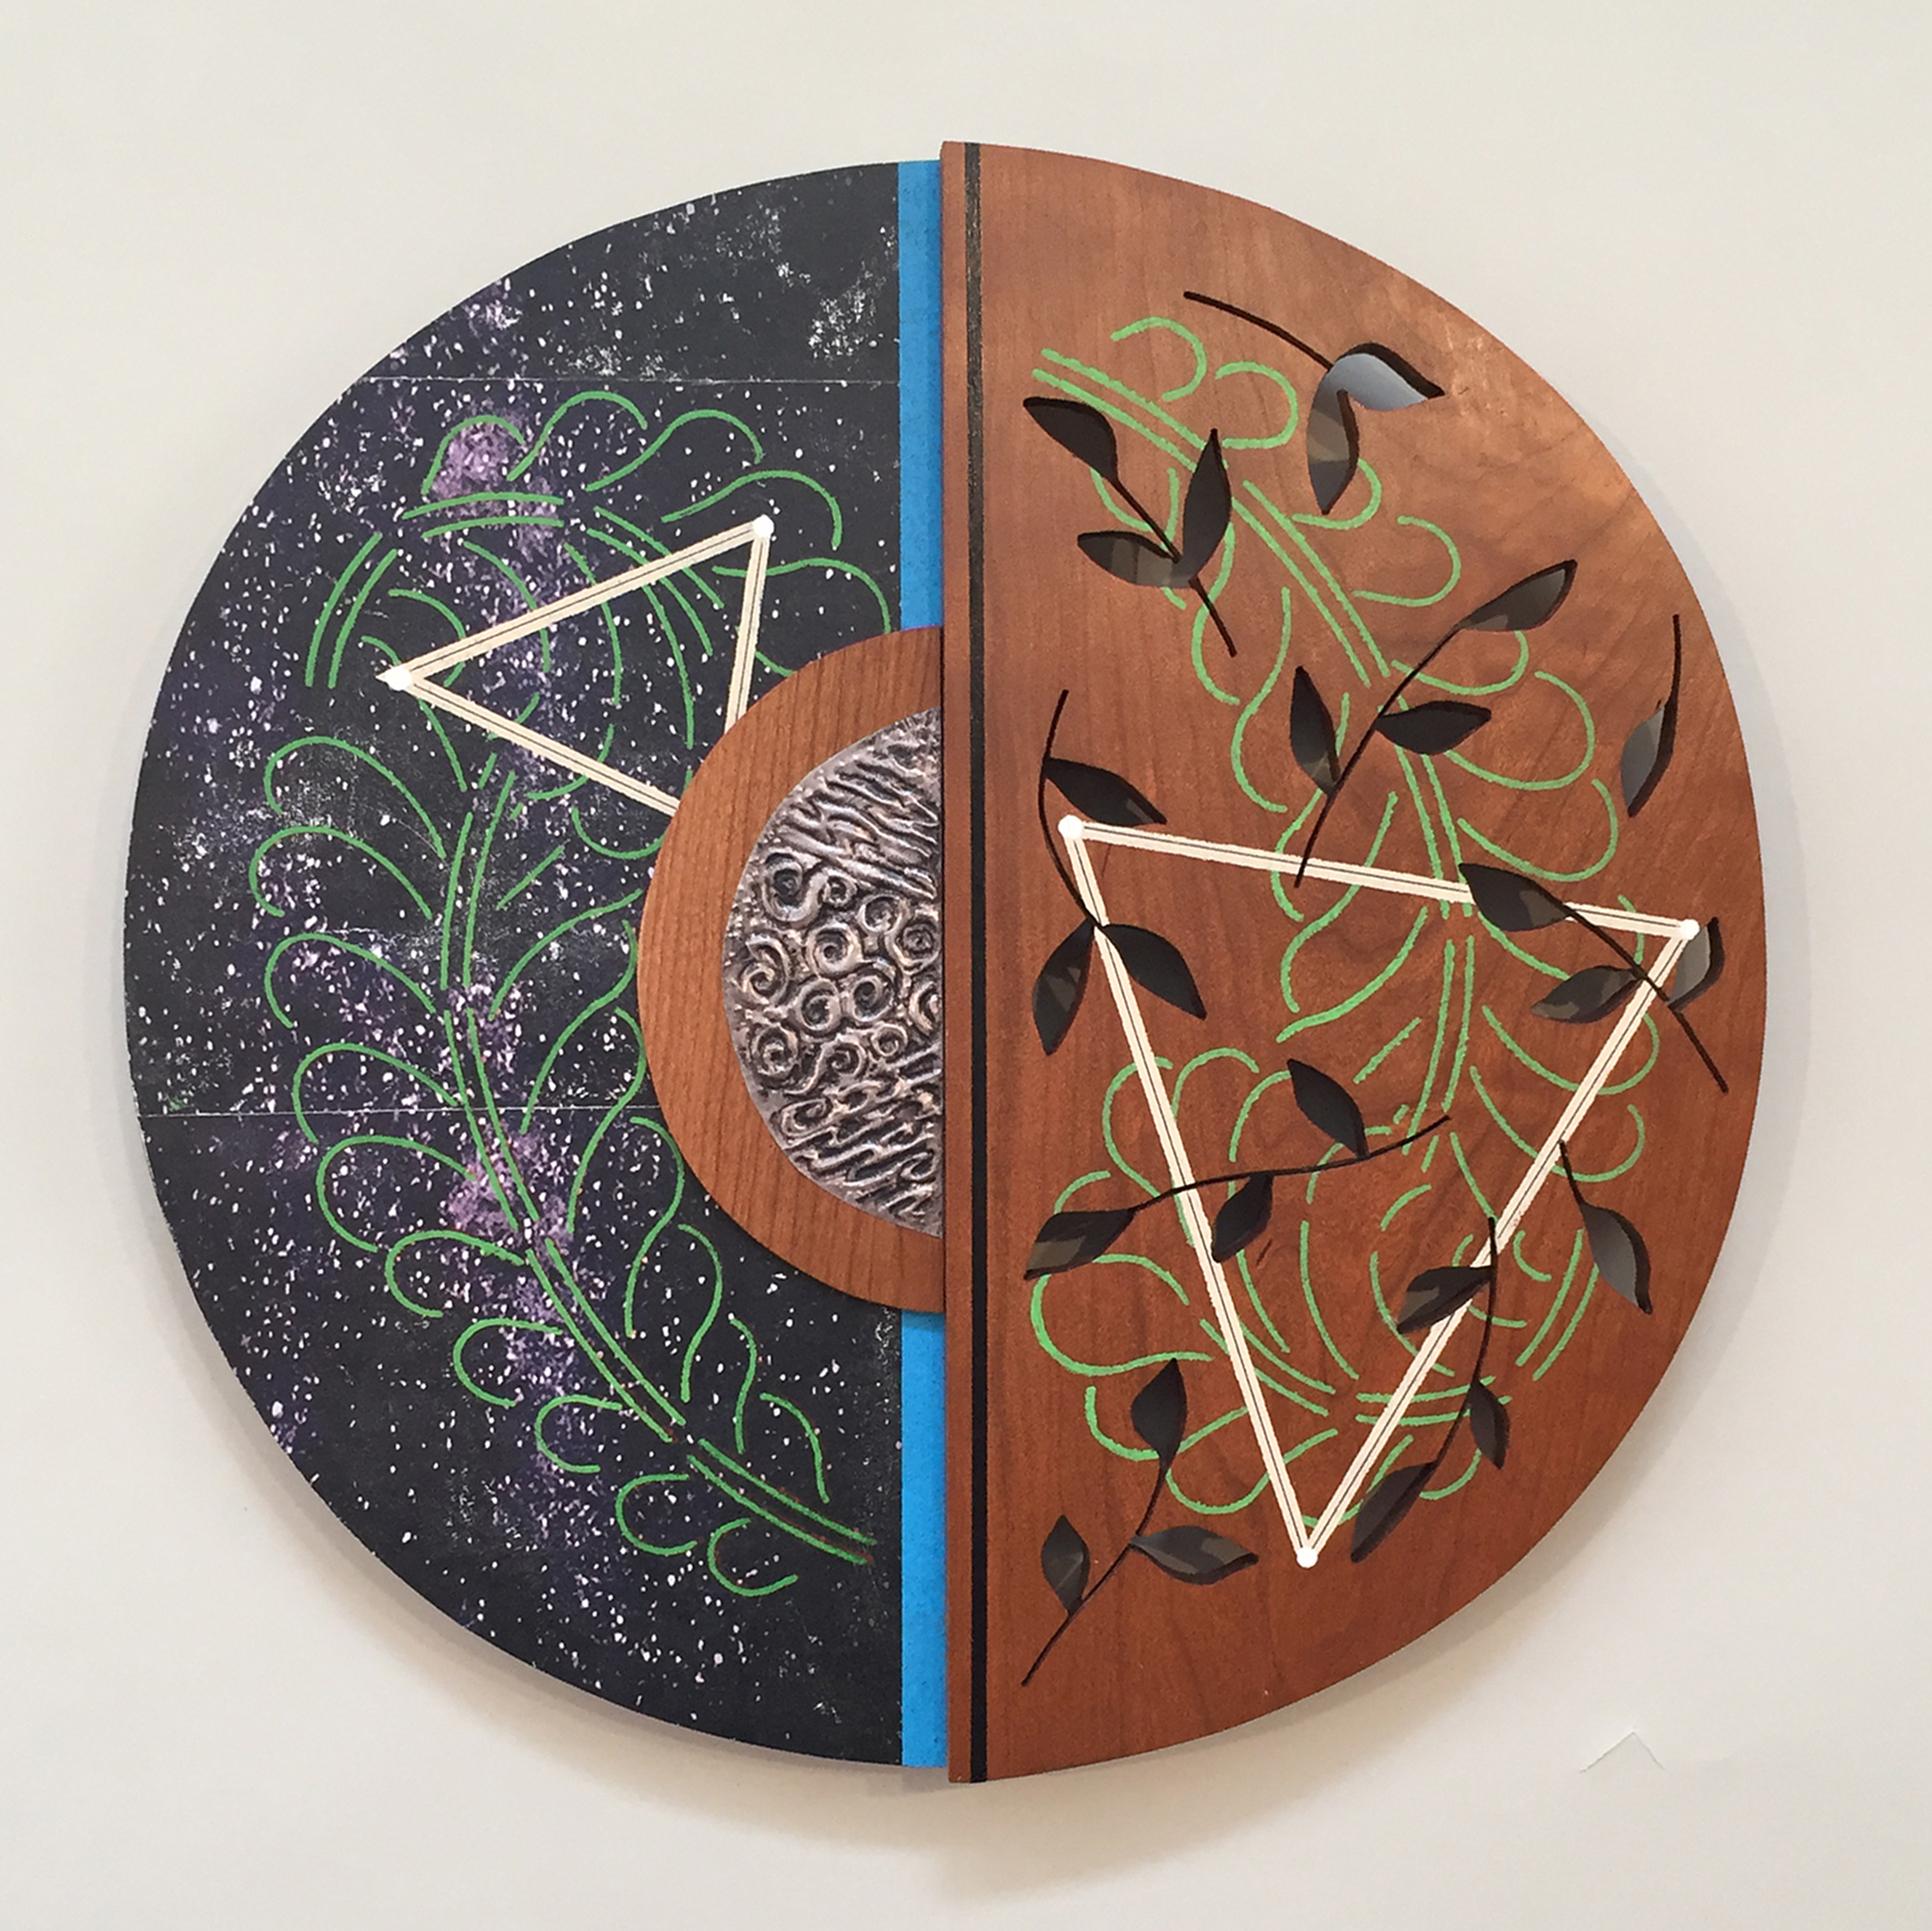 Charlotte Lees
Earth Series III
16x16x1"
Cherry Wood, Paint, Metal
$1200

Charlotte Lees, an artist who creates contemporary images that often reference a connection to the environment. The blending of man and nature imparts a more meaningful